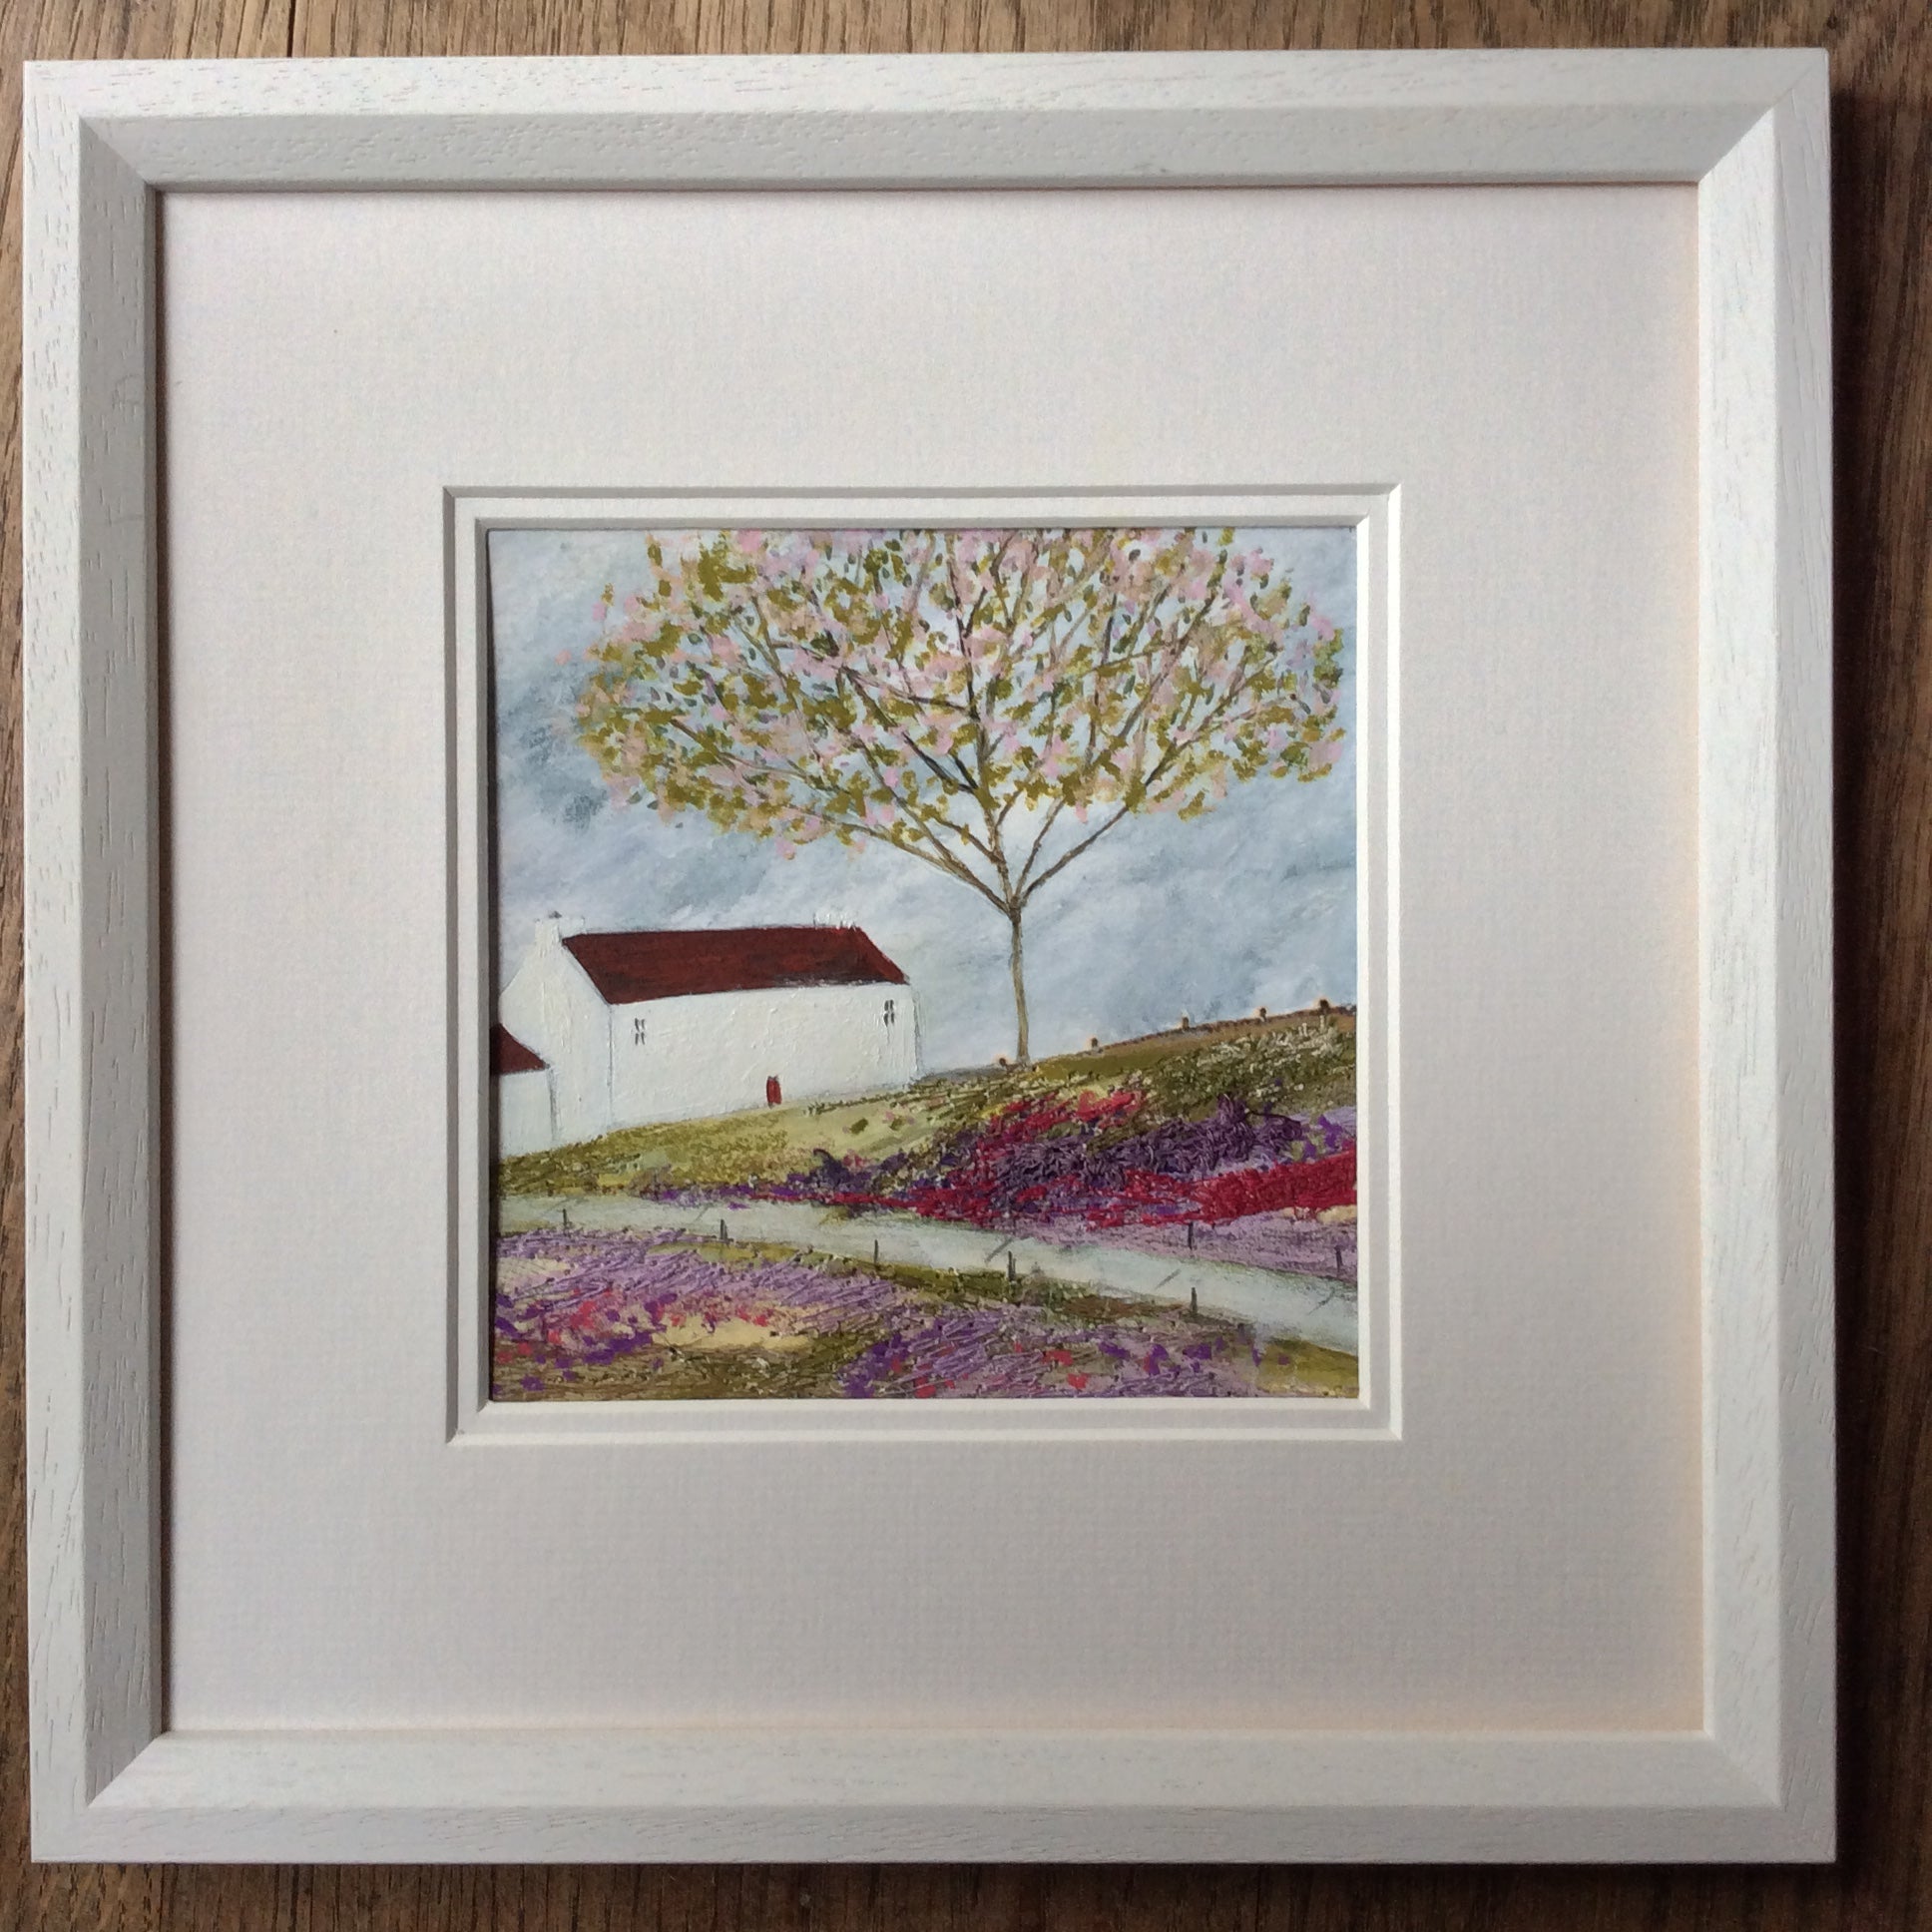 Mixed Media Art print work by Louise O'Hara "A rather large cherry blossom”